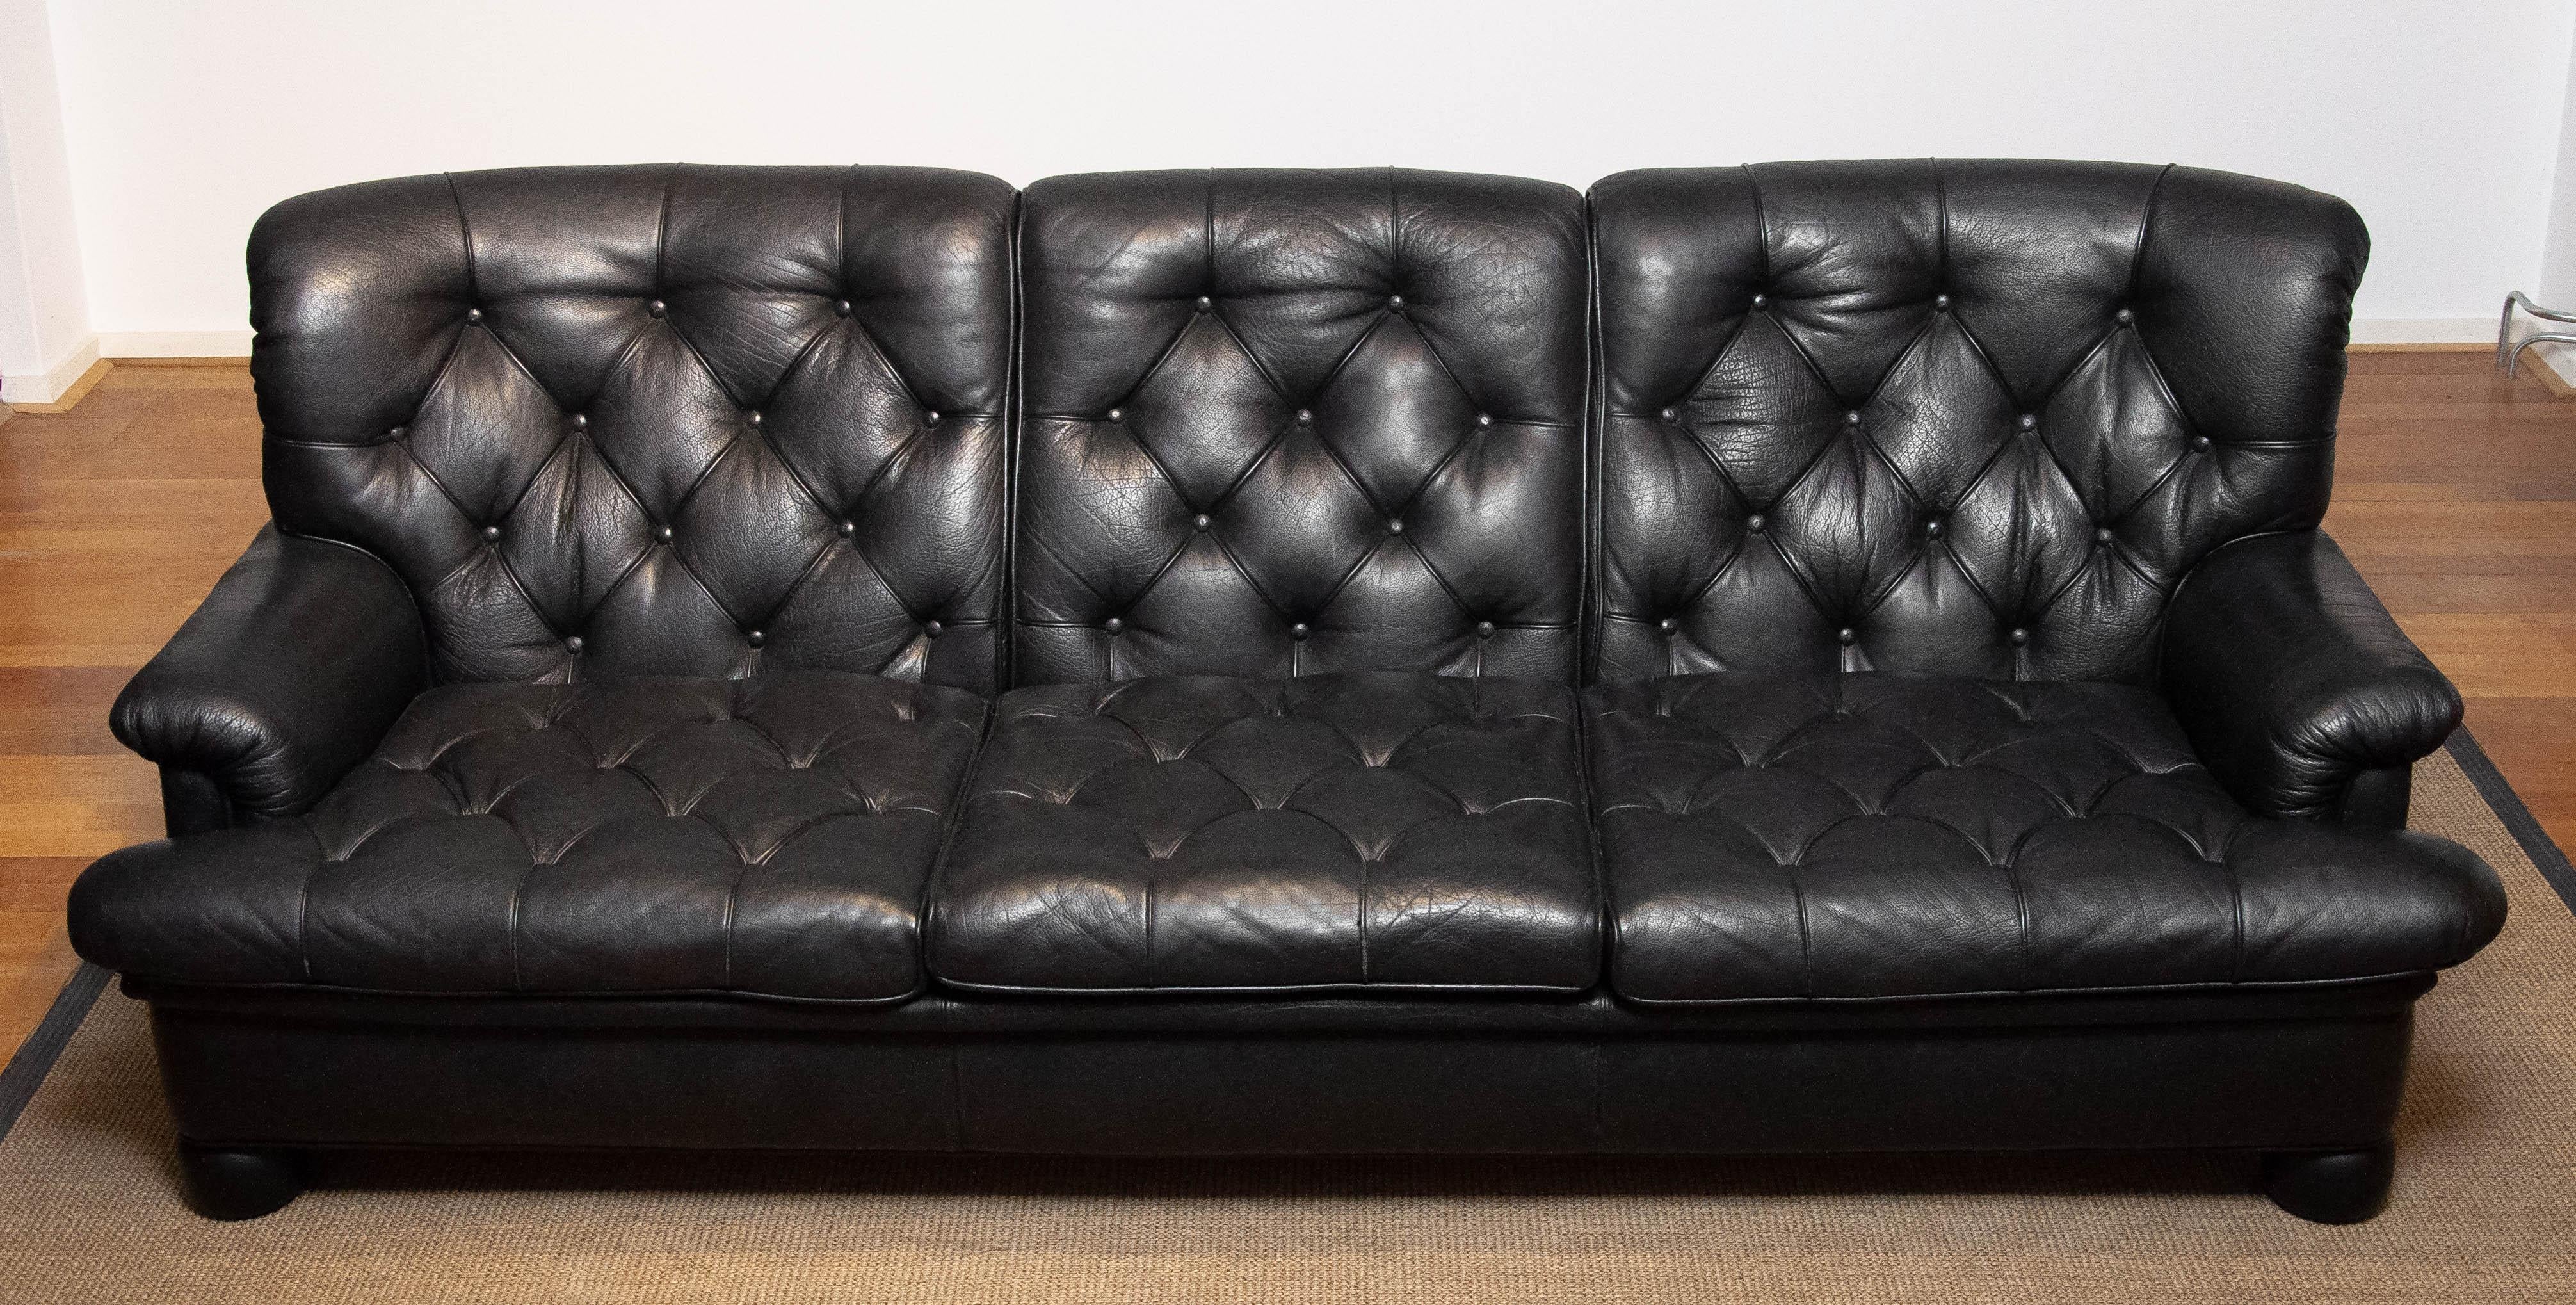 1960 Black Leather Chesterfield Model 'Jupiter' Three Seater Sofa by Arne Norell For Sale 1